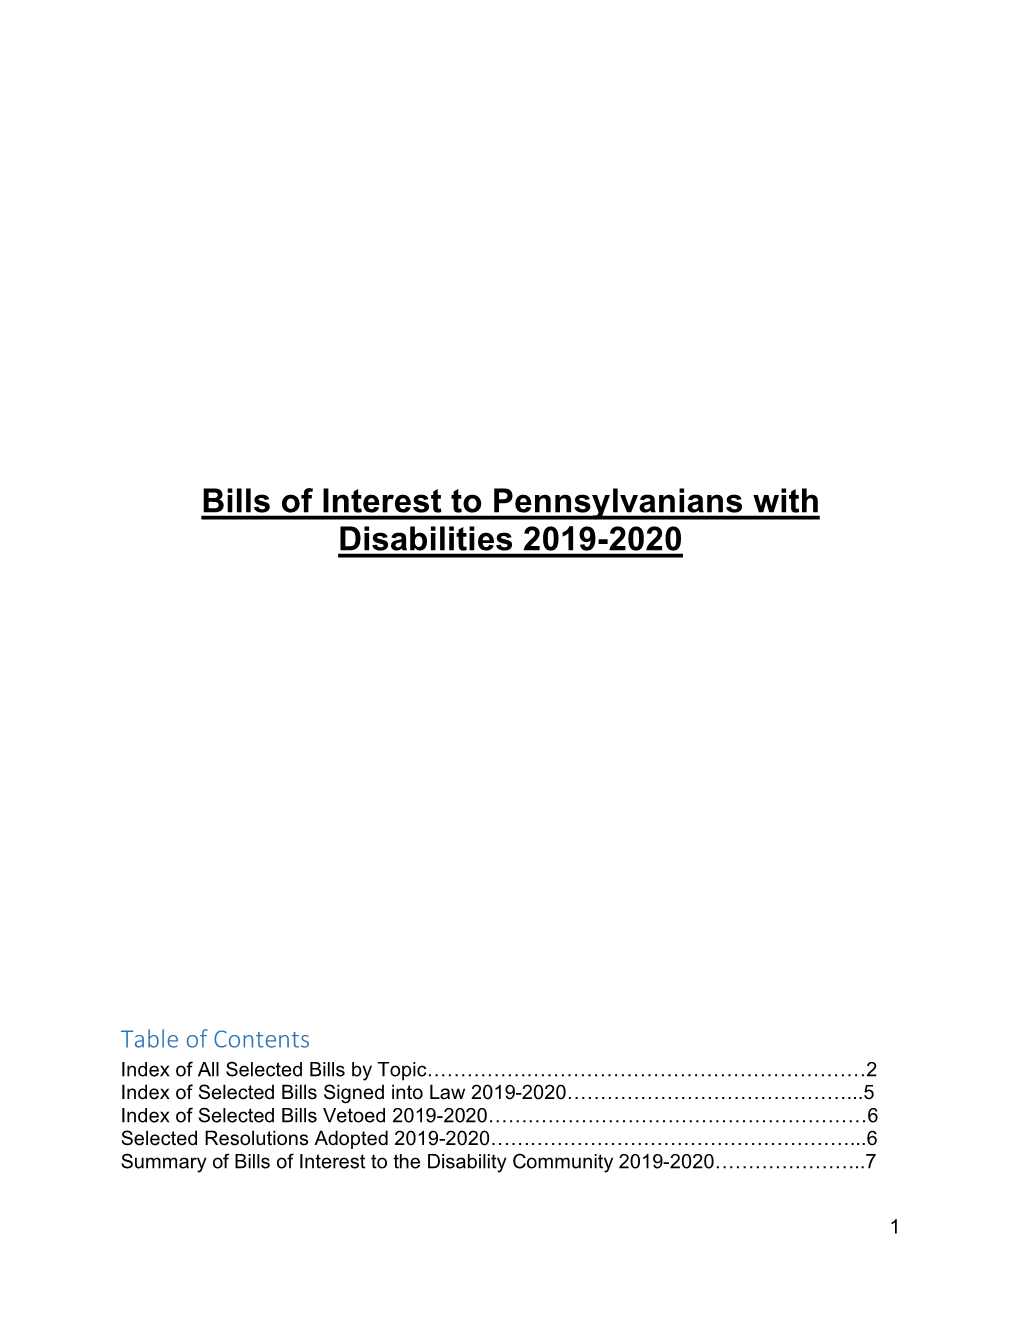 Bills of Interest to Pennsylvanians with Disabilities 2019-2020